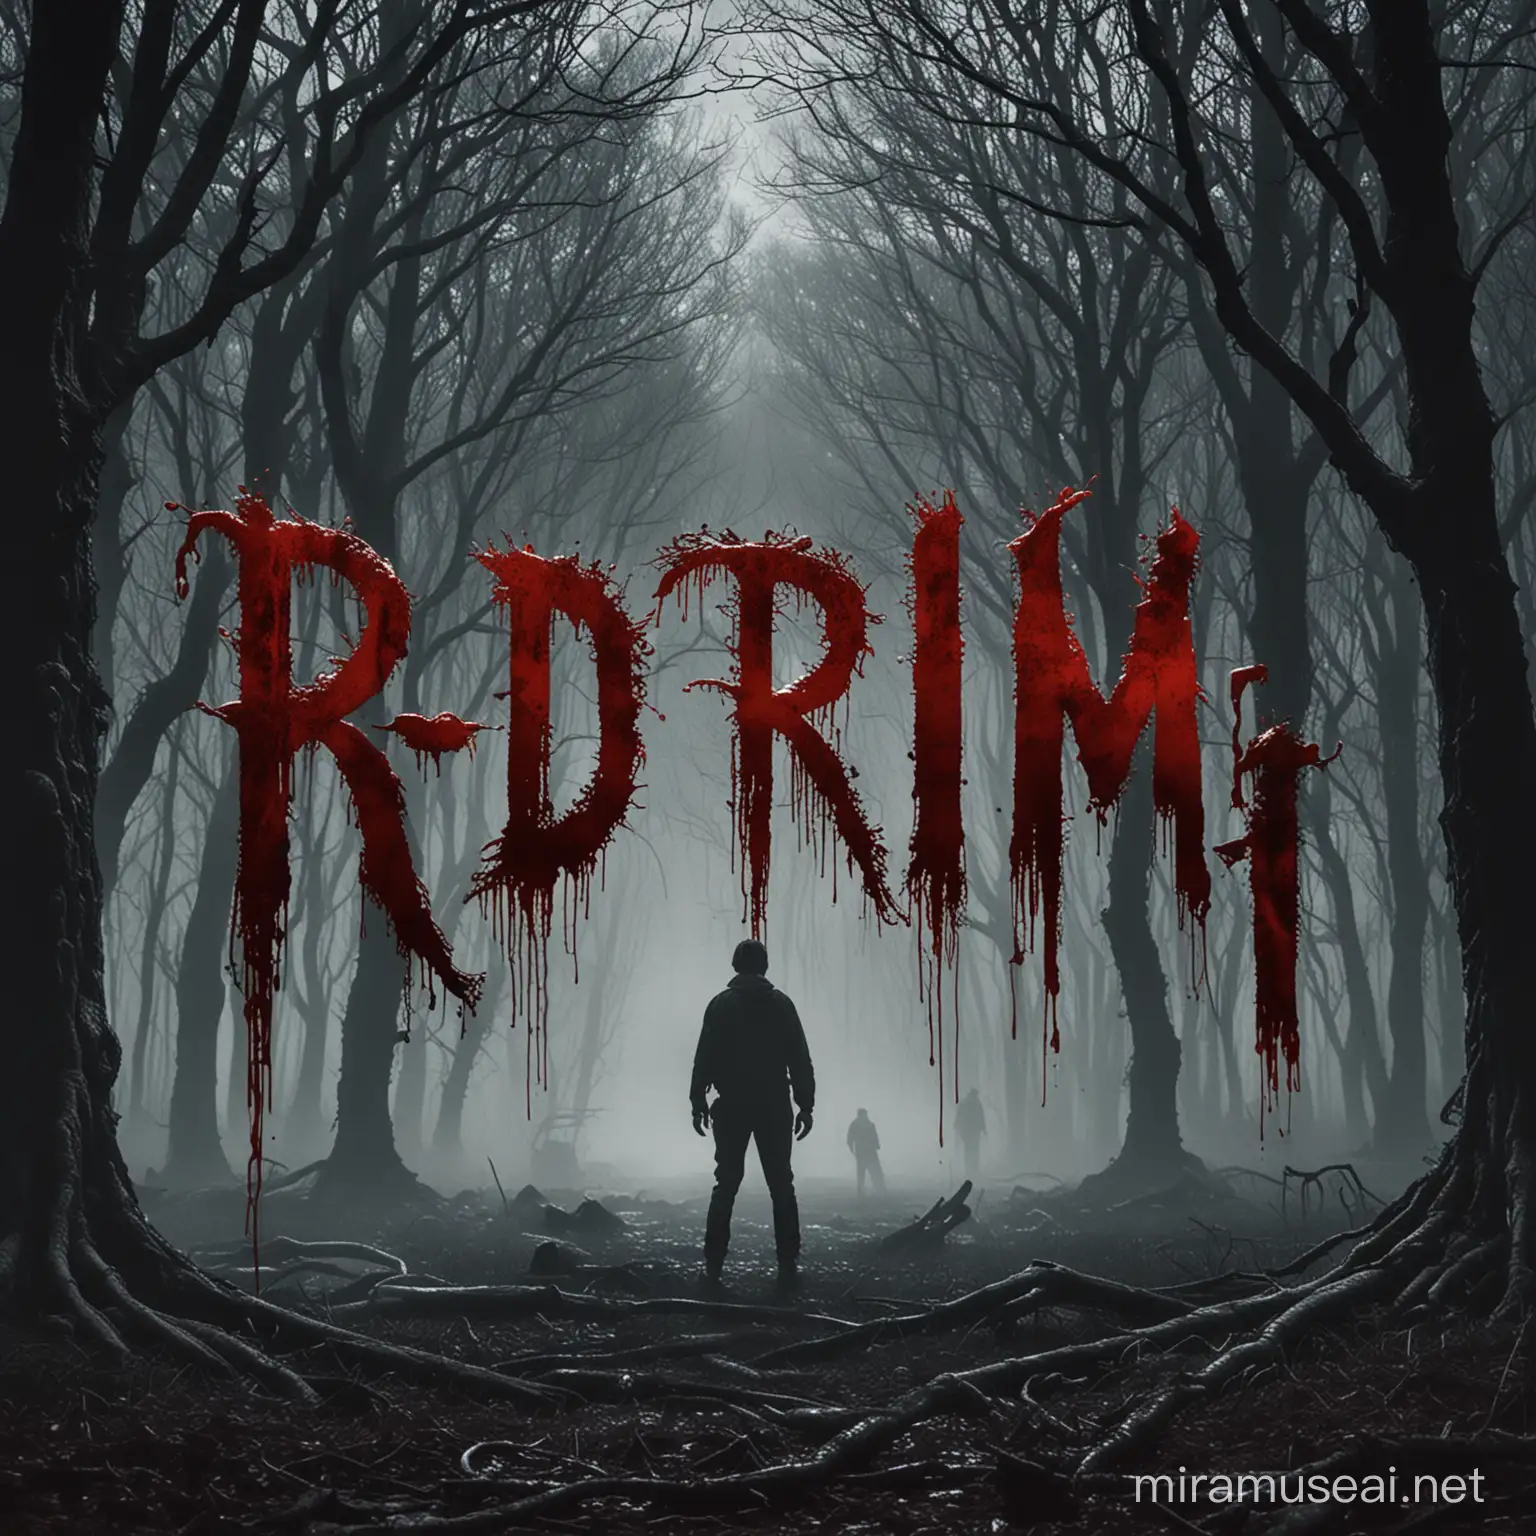 Terrified Boys Face Unseen Horror in REDRUM Poster